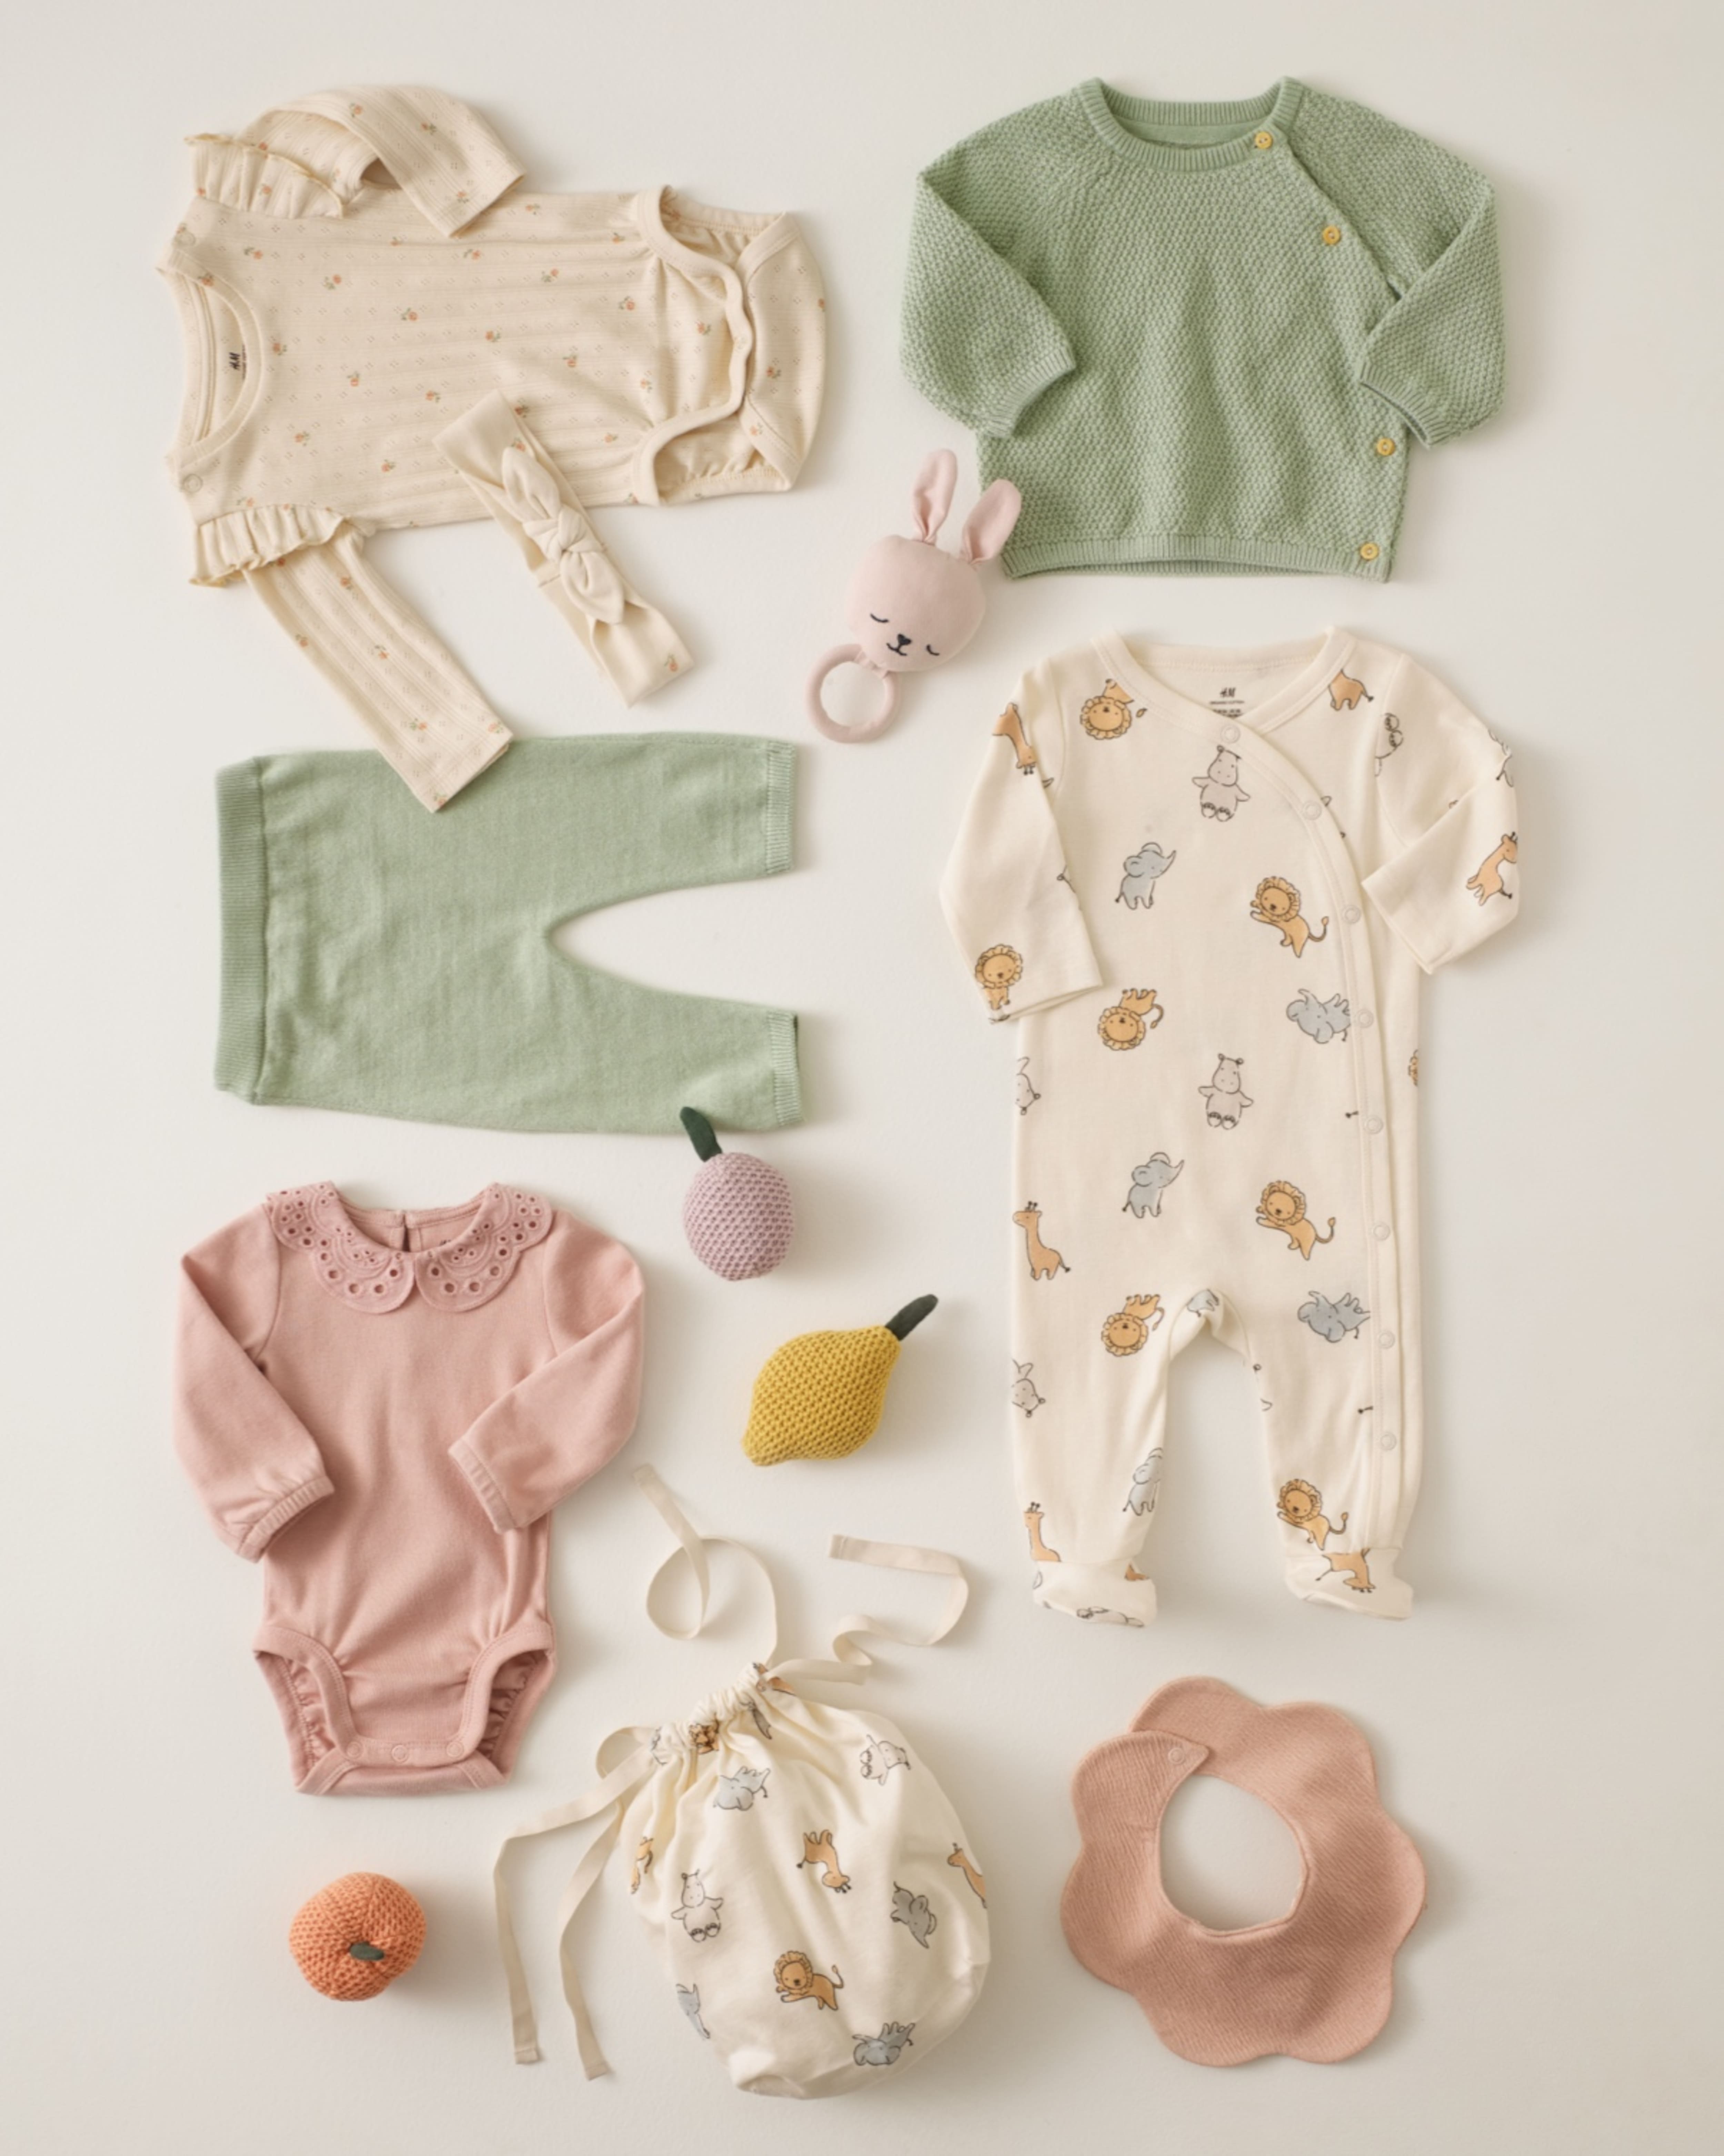 The Sweetest Occasion: Baby Girl Gifts for Newborn